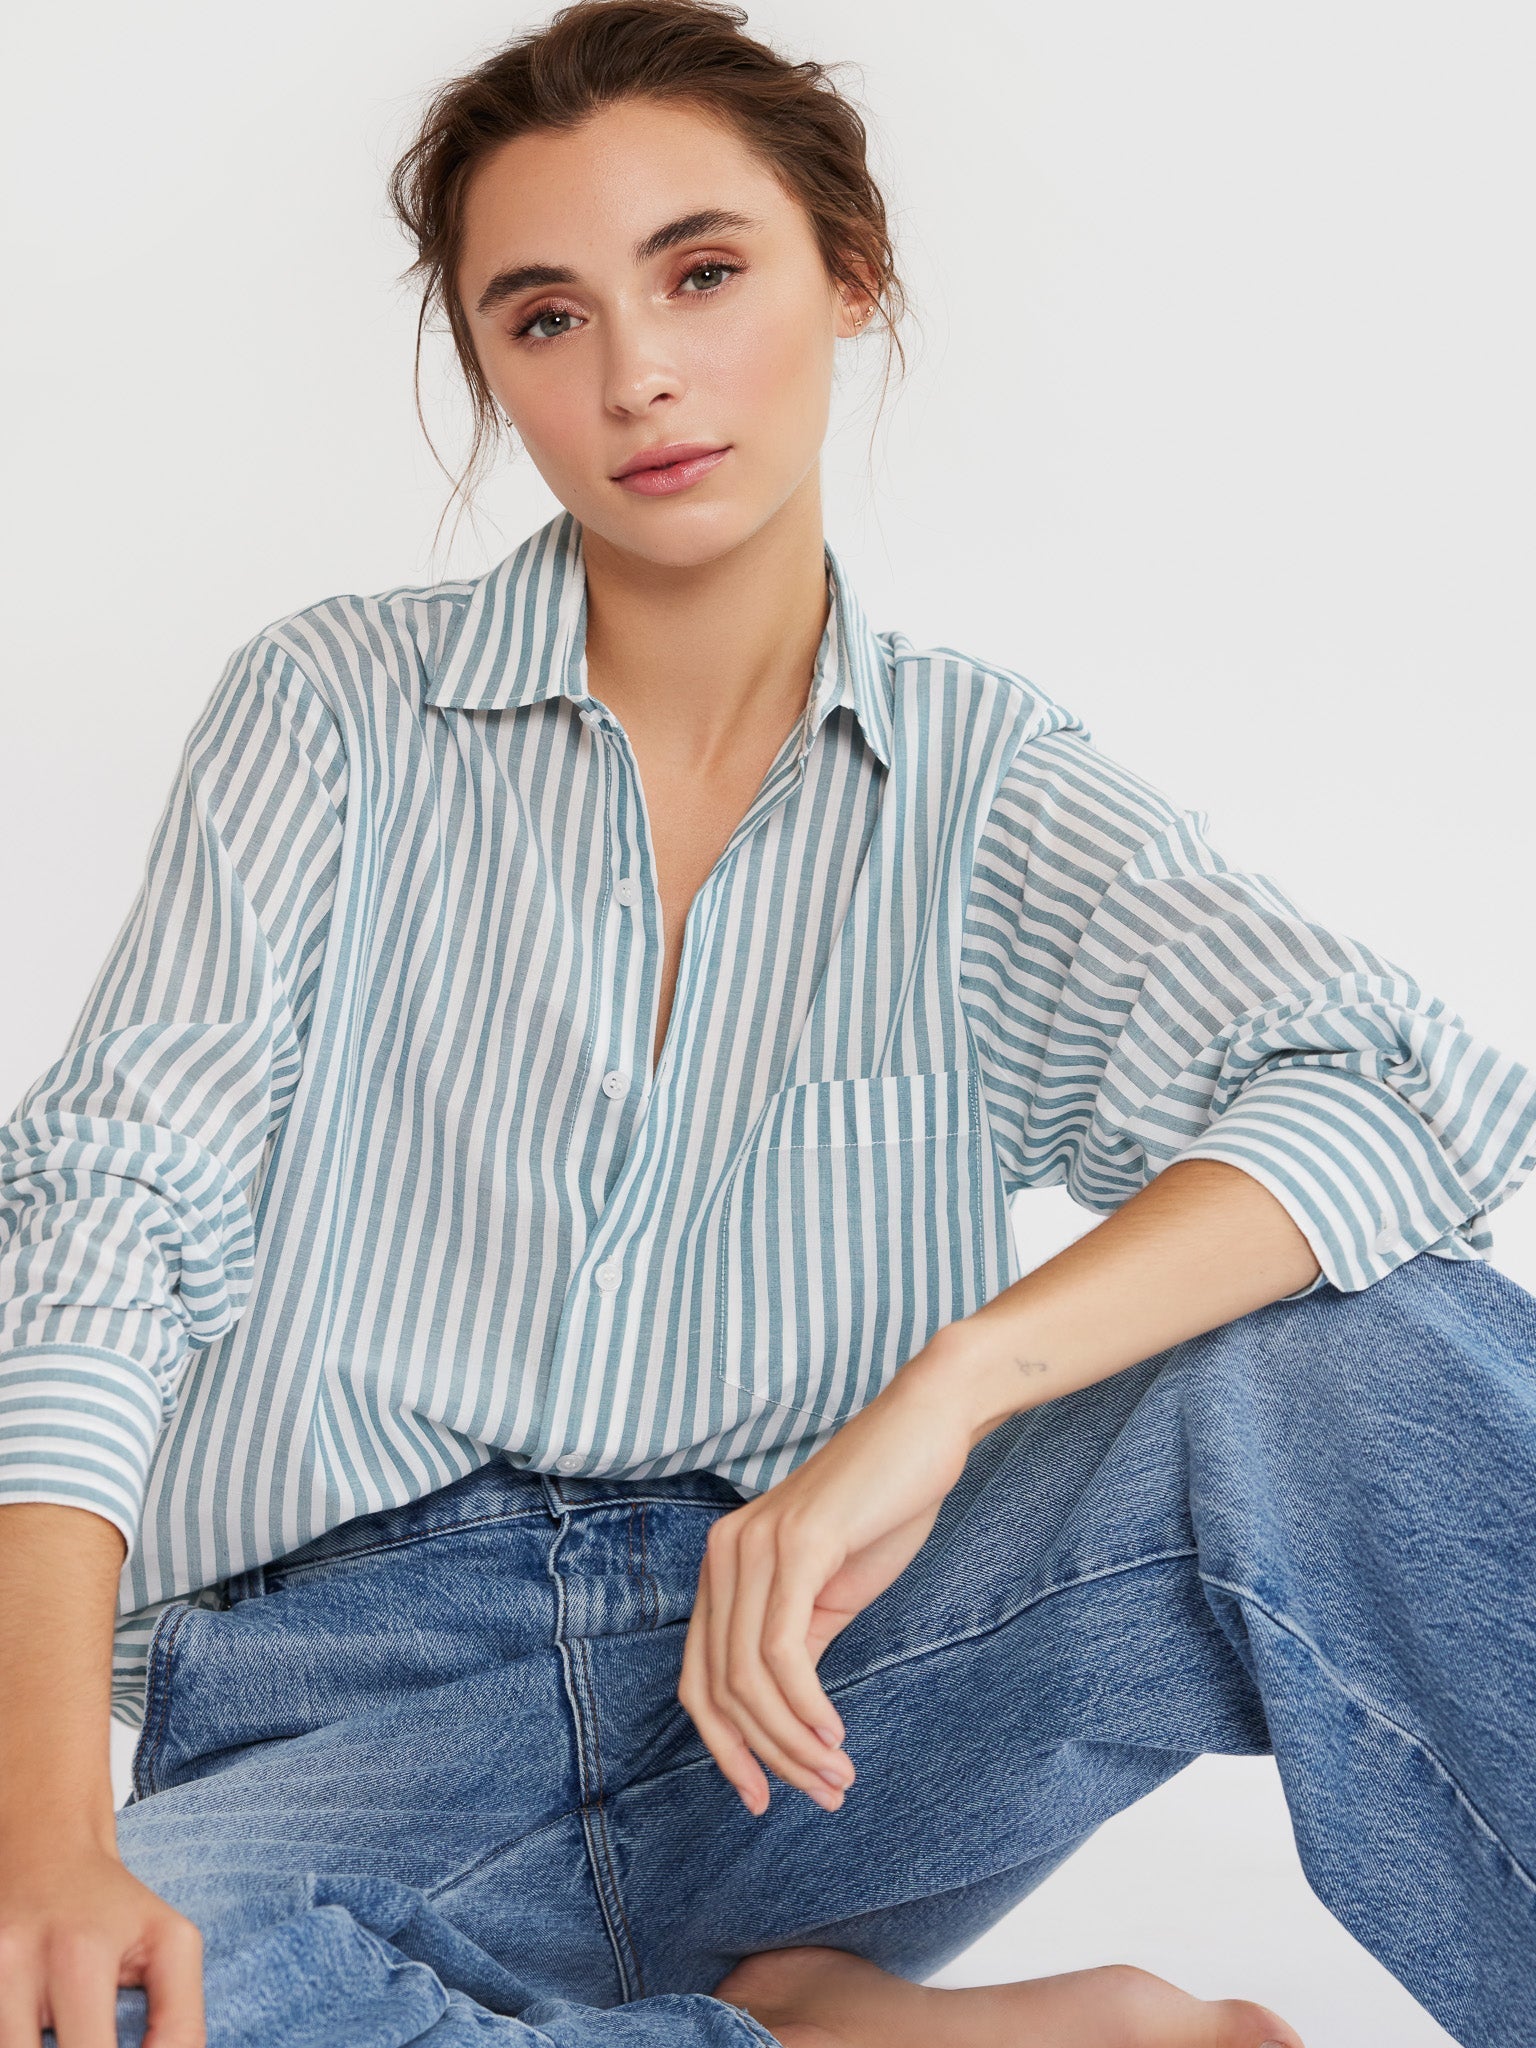 MILLE Clothing Sofia Top in Calais Stripe